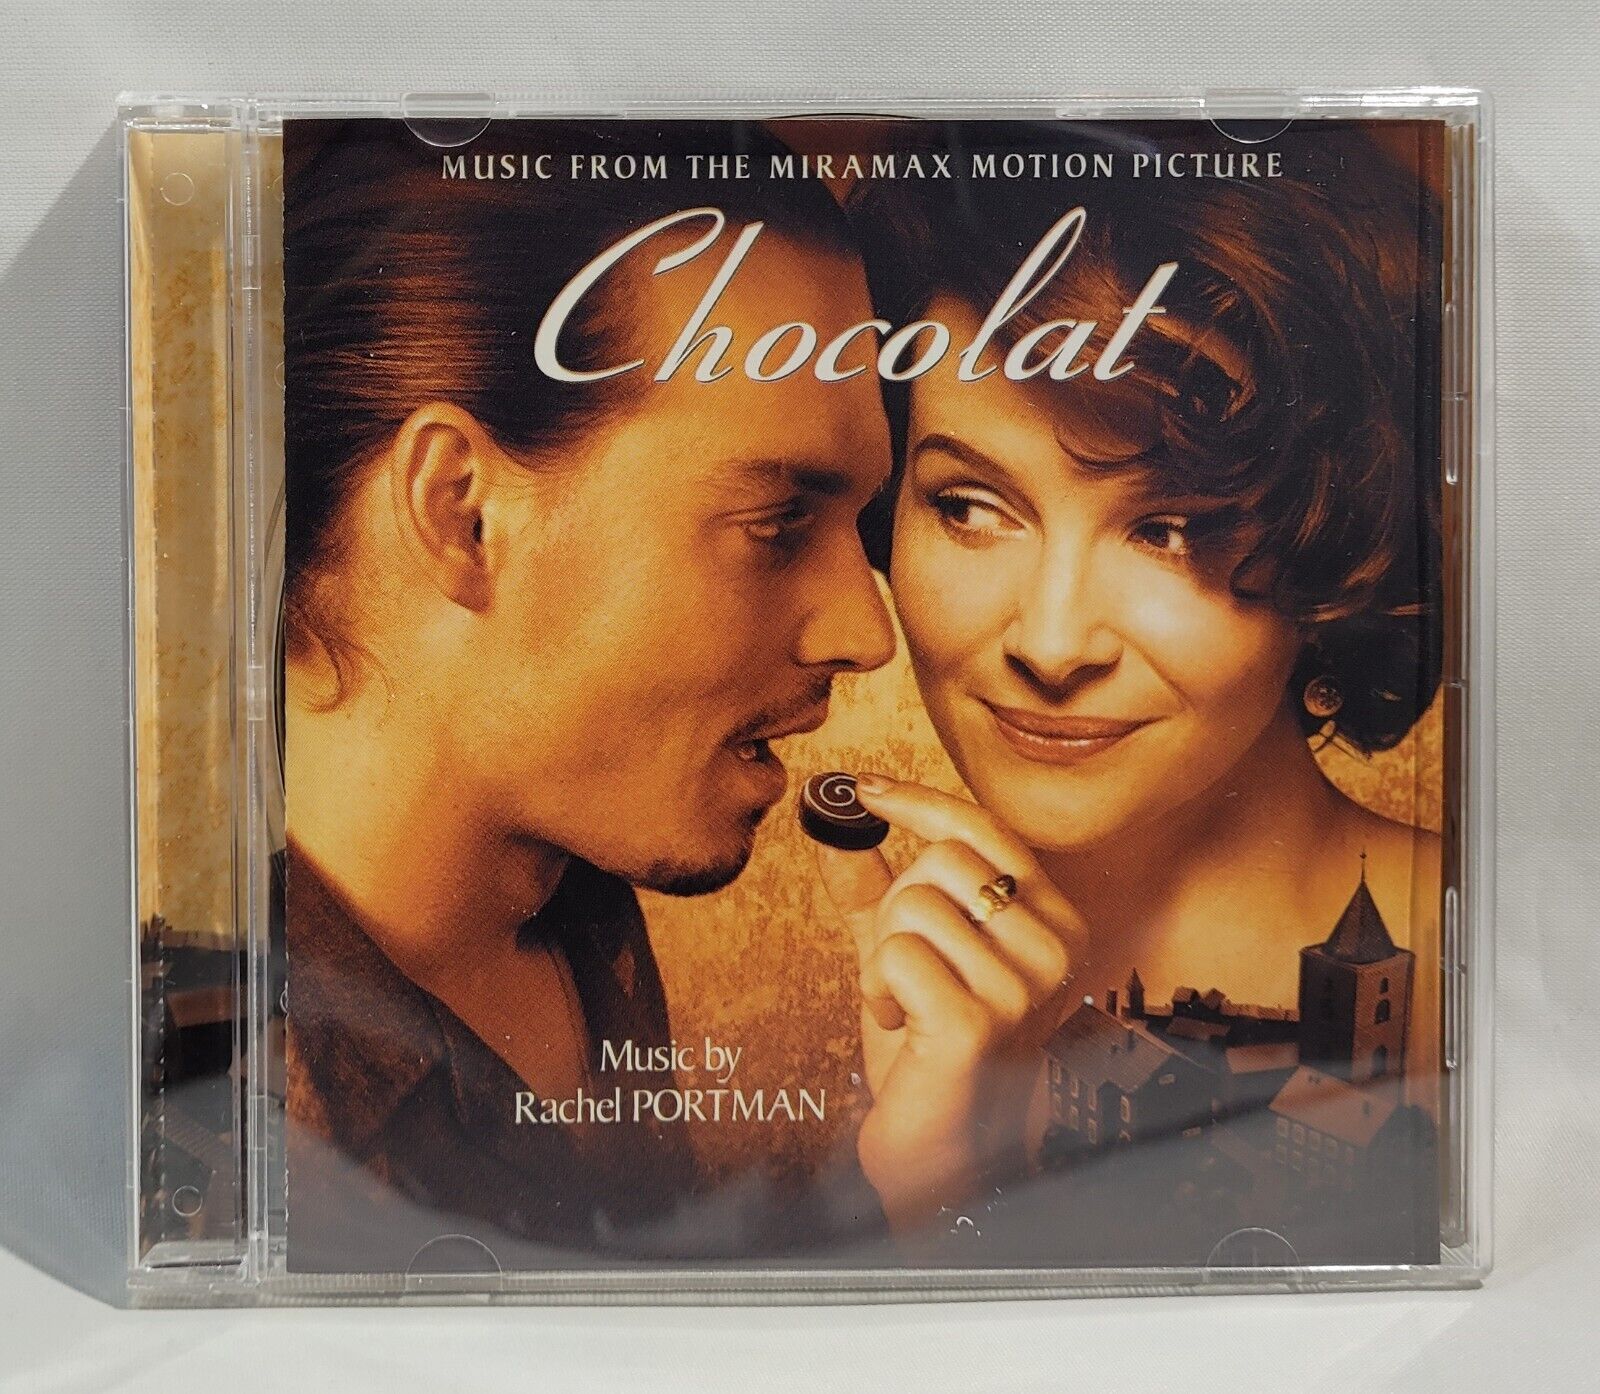 Soundtrack - Chocolat (Music From the Miramax Motion Picture) [CD]